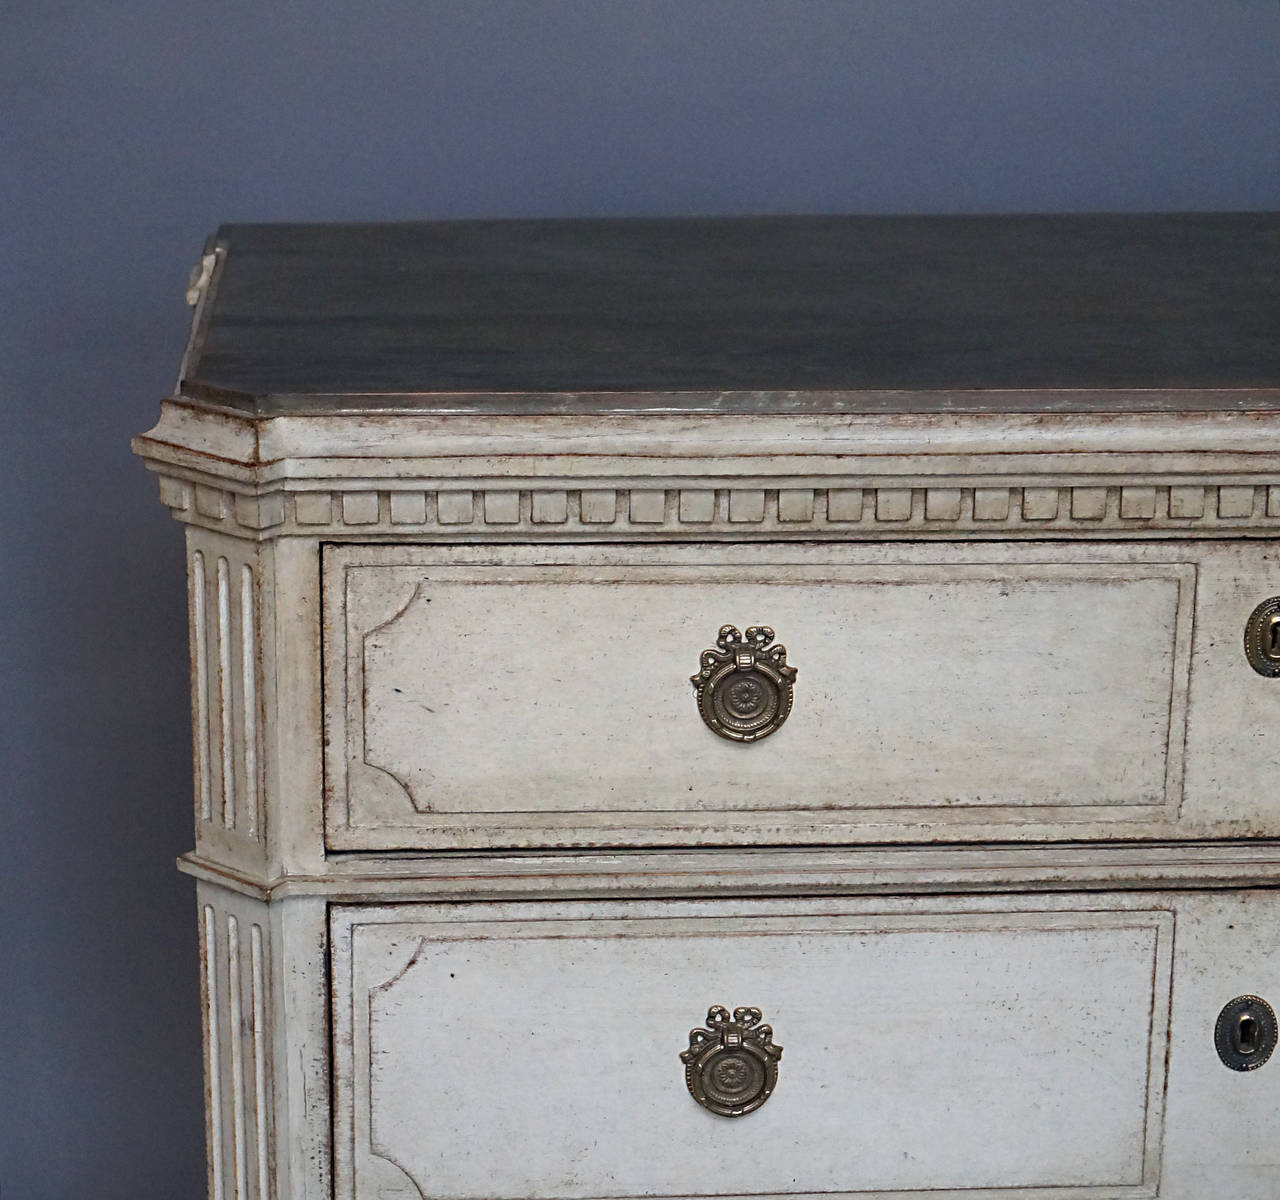 Swedish chest of three drawers, circa 1840, with late Gustavian influences. Raised panel drawers, canted corners and dentil molding under the shaped top. Brass pulls and escutcheons.